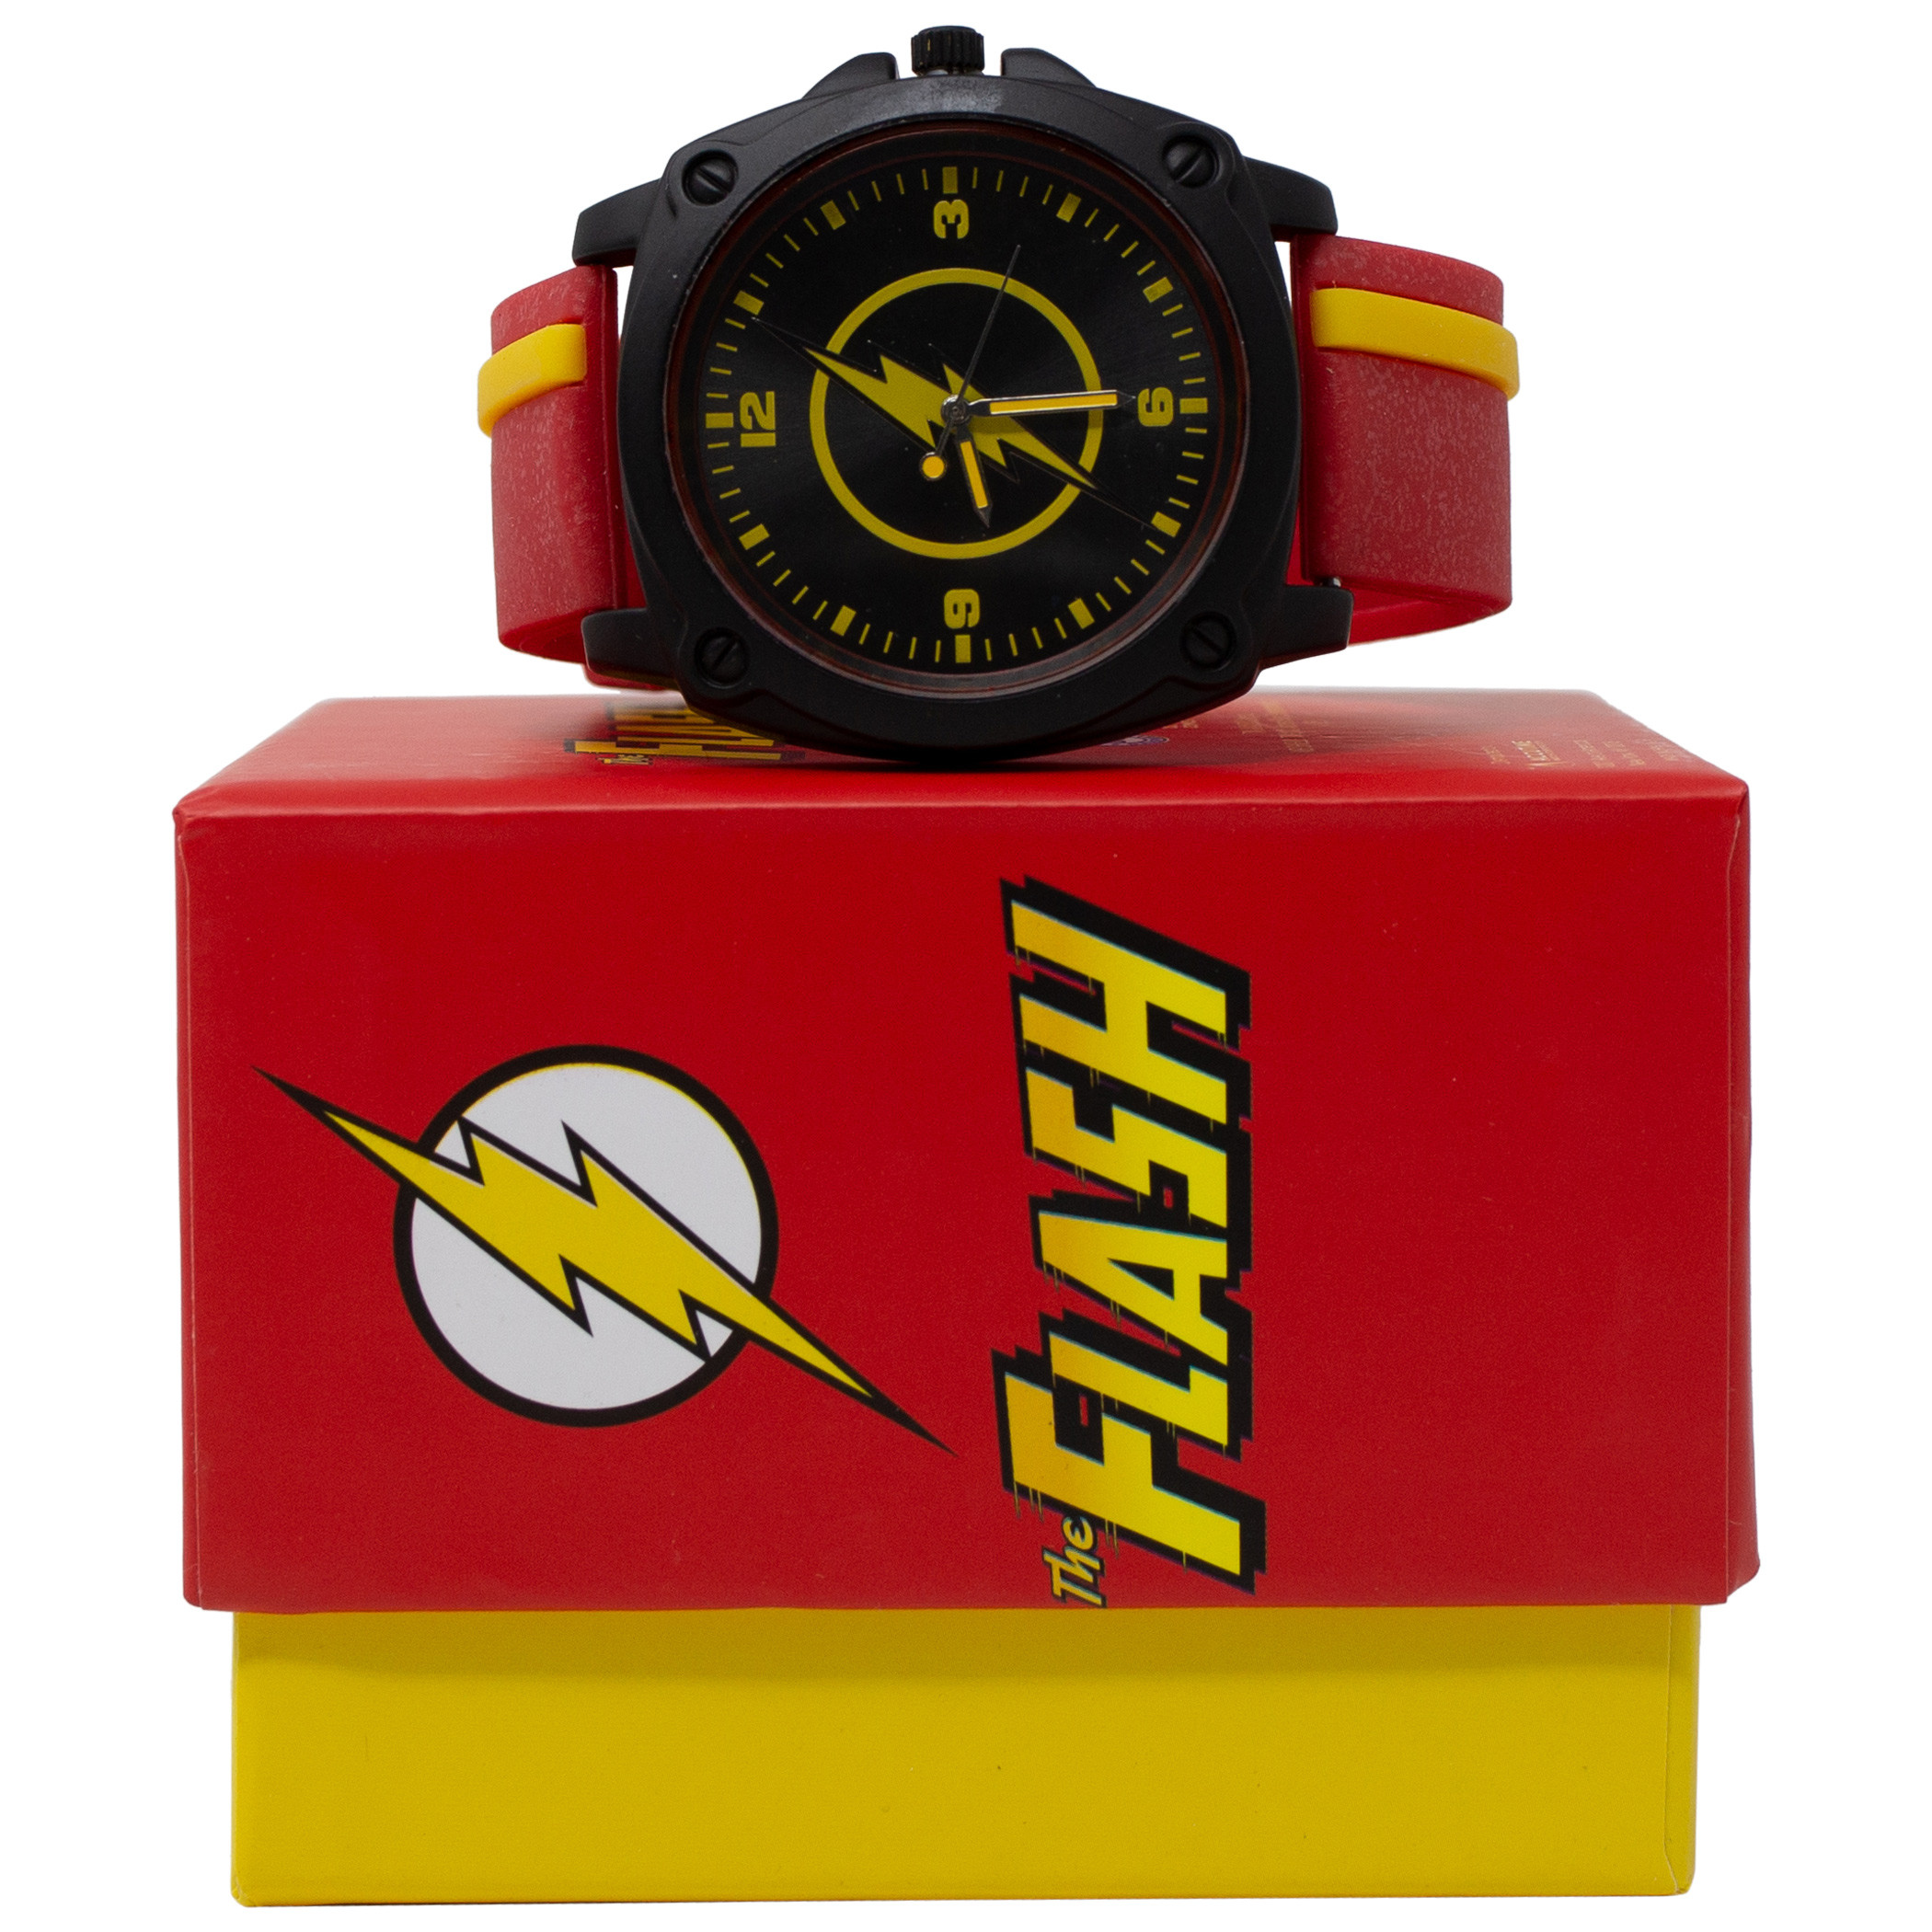 Flash Symbol Red and Yellow Watch